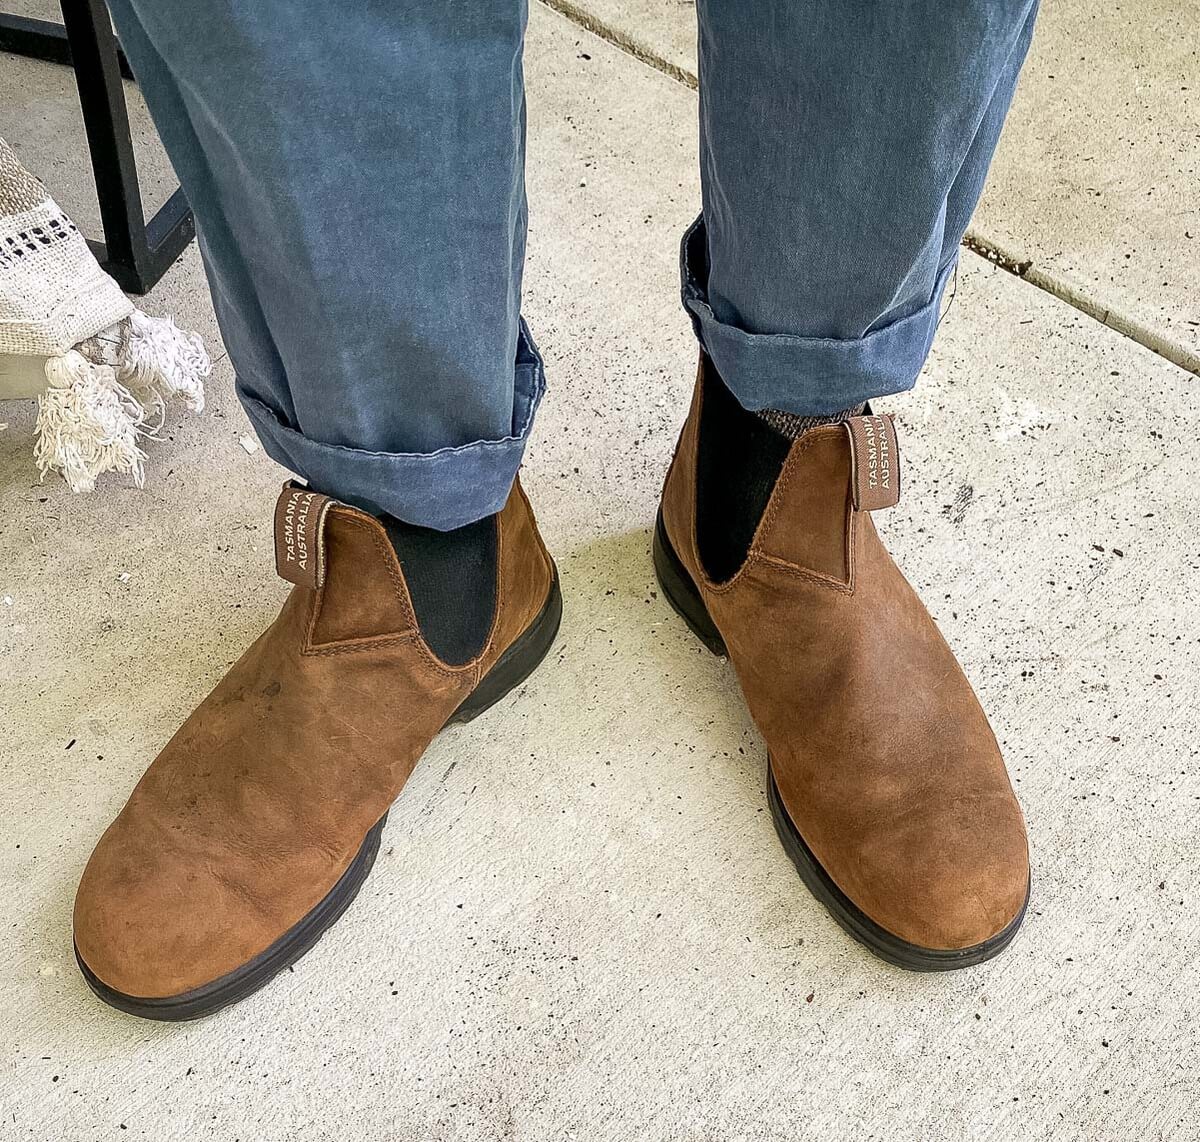 Blundstone classic 550s with navy chinos front view